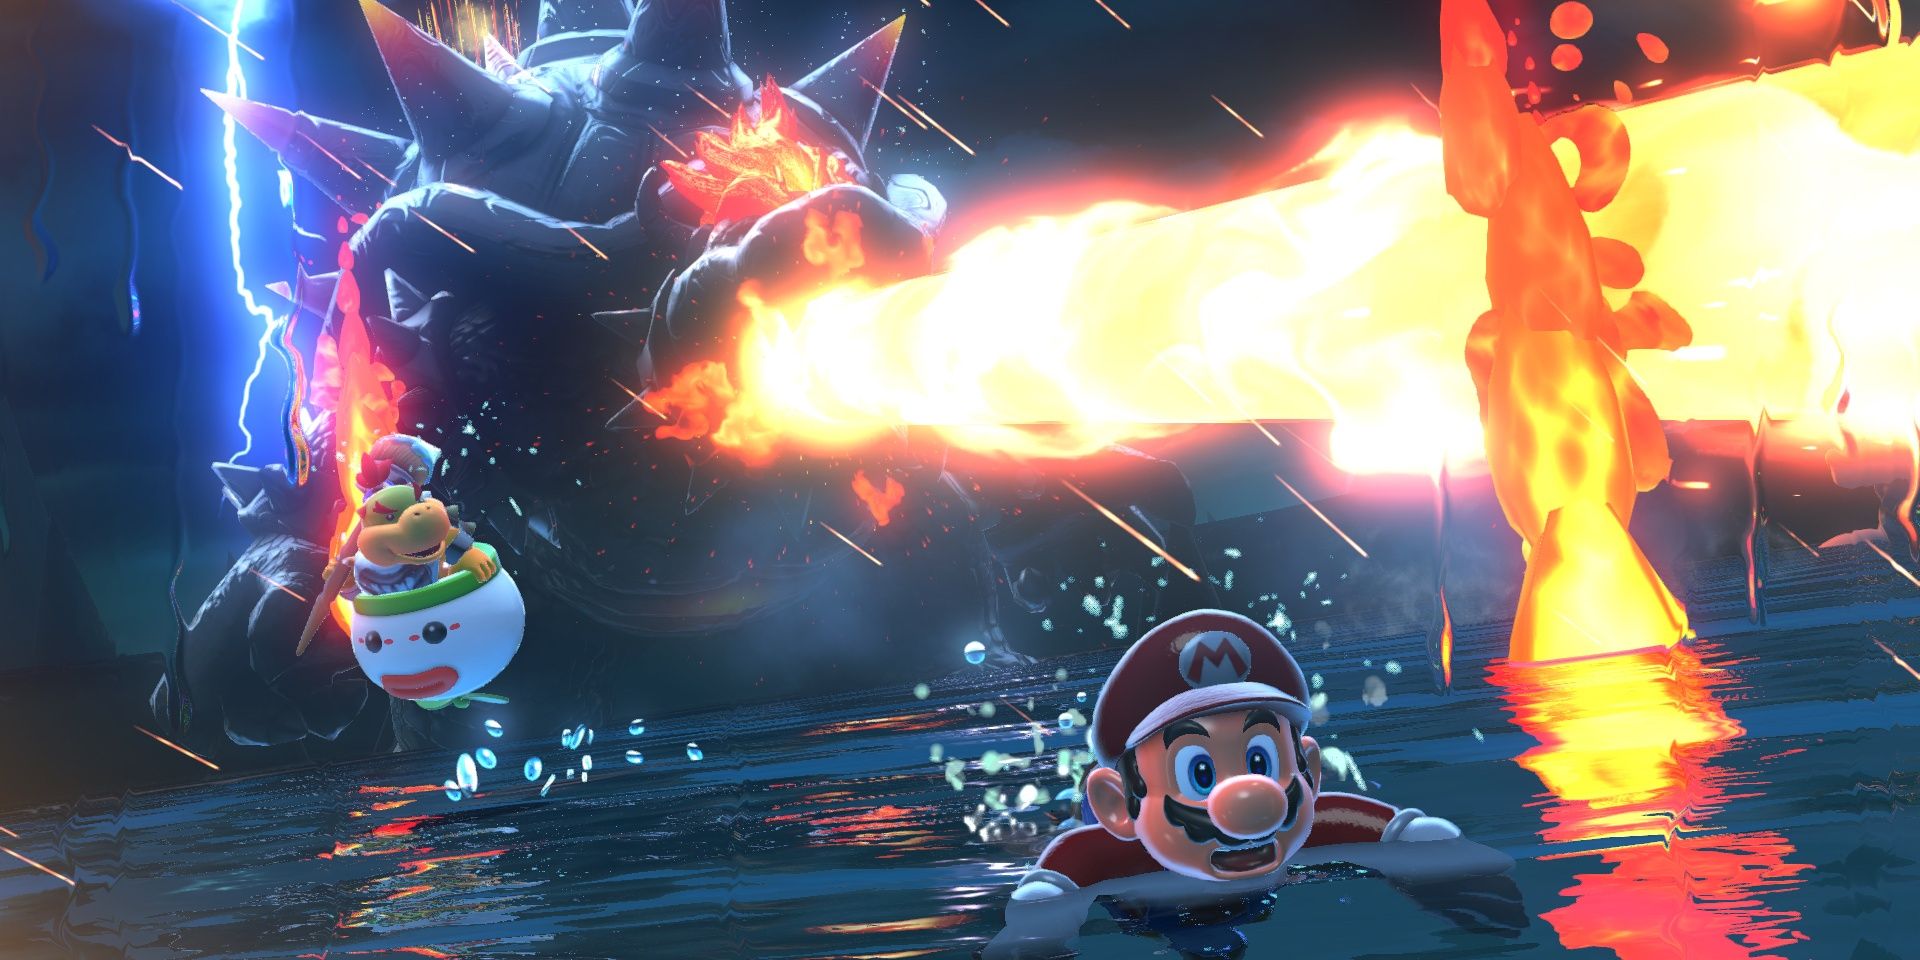 Fury Bowser shooting a large beam of fire while Mario swims in the water and Bowser Jr. hovers nearby in Bowser's Fury.